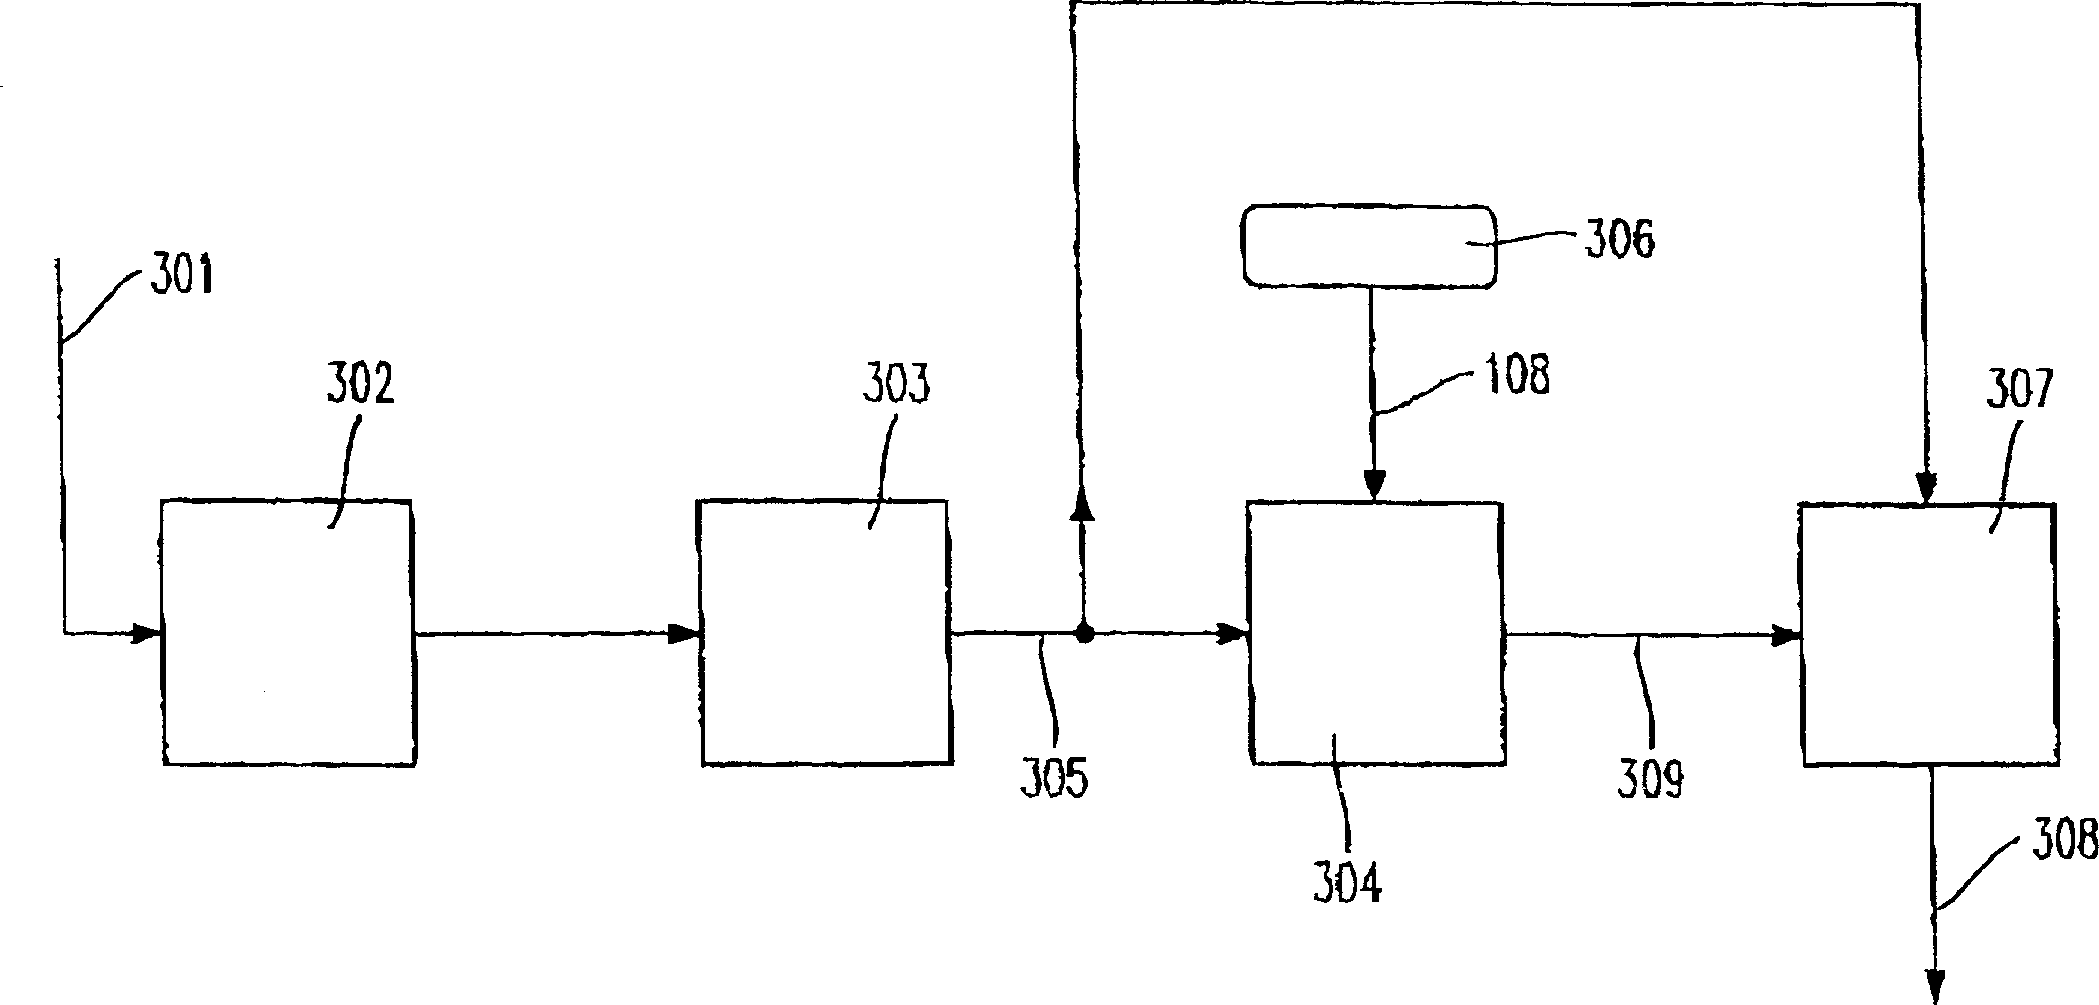 Method for determining a reference pulse phase from band-limited digital data streams